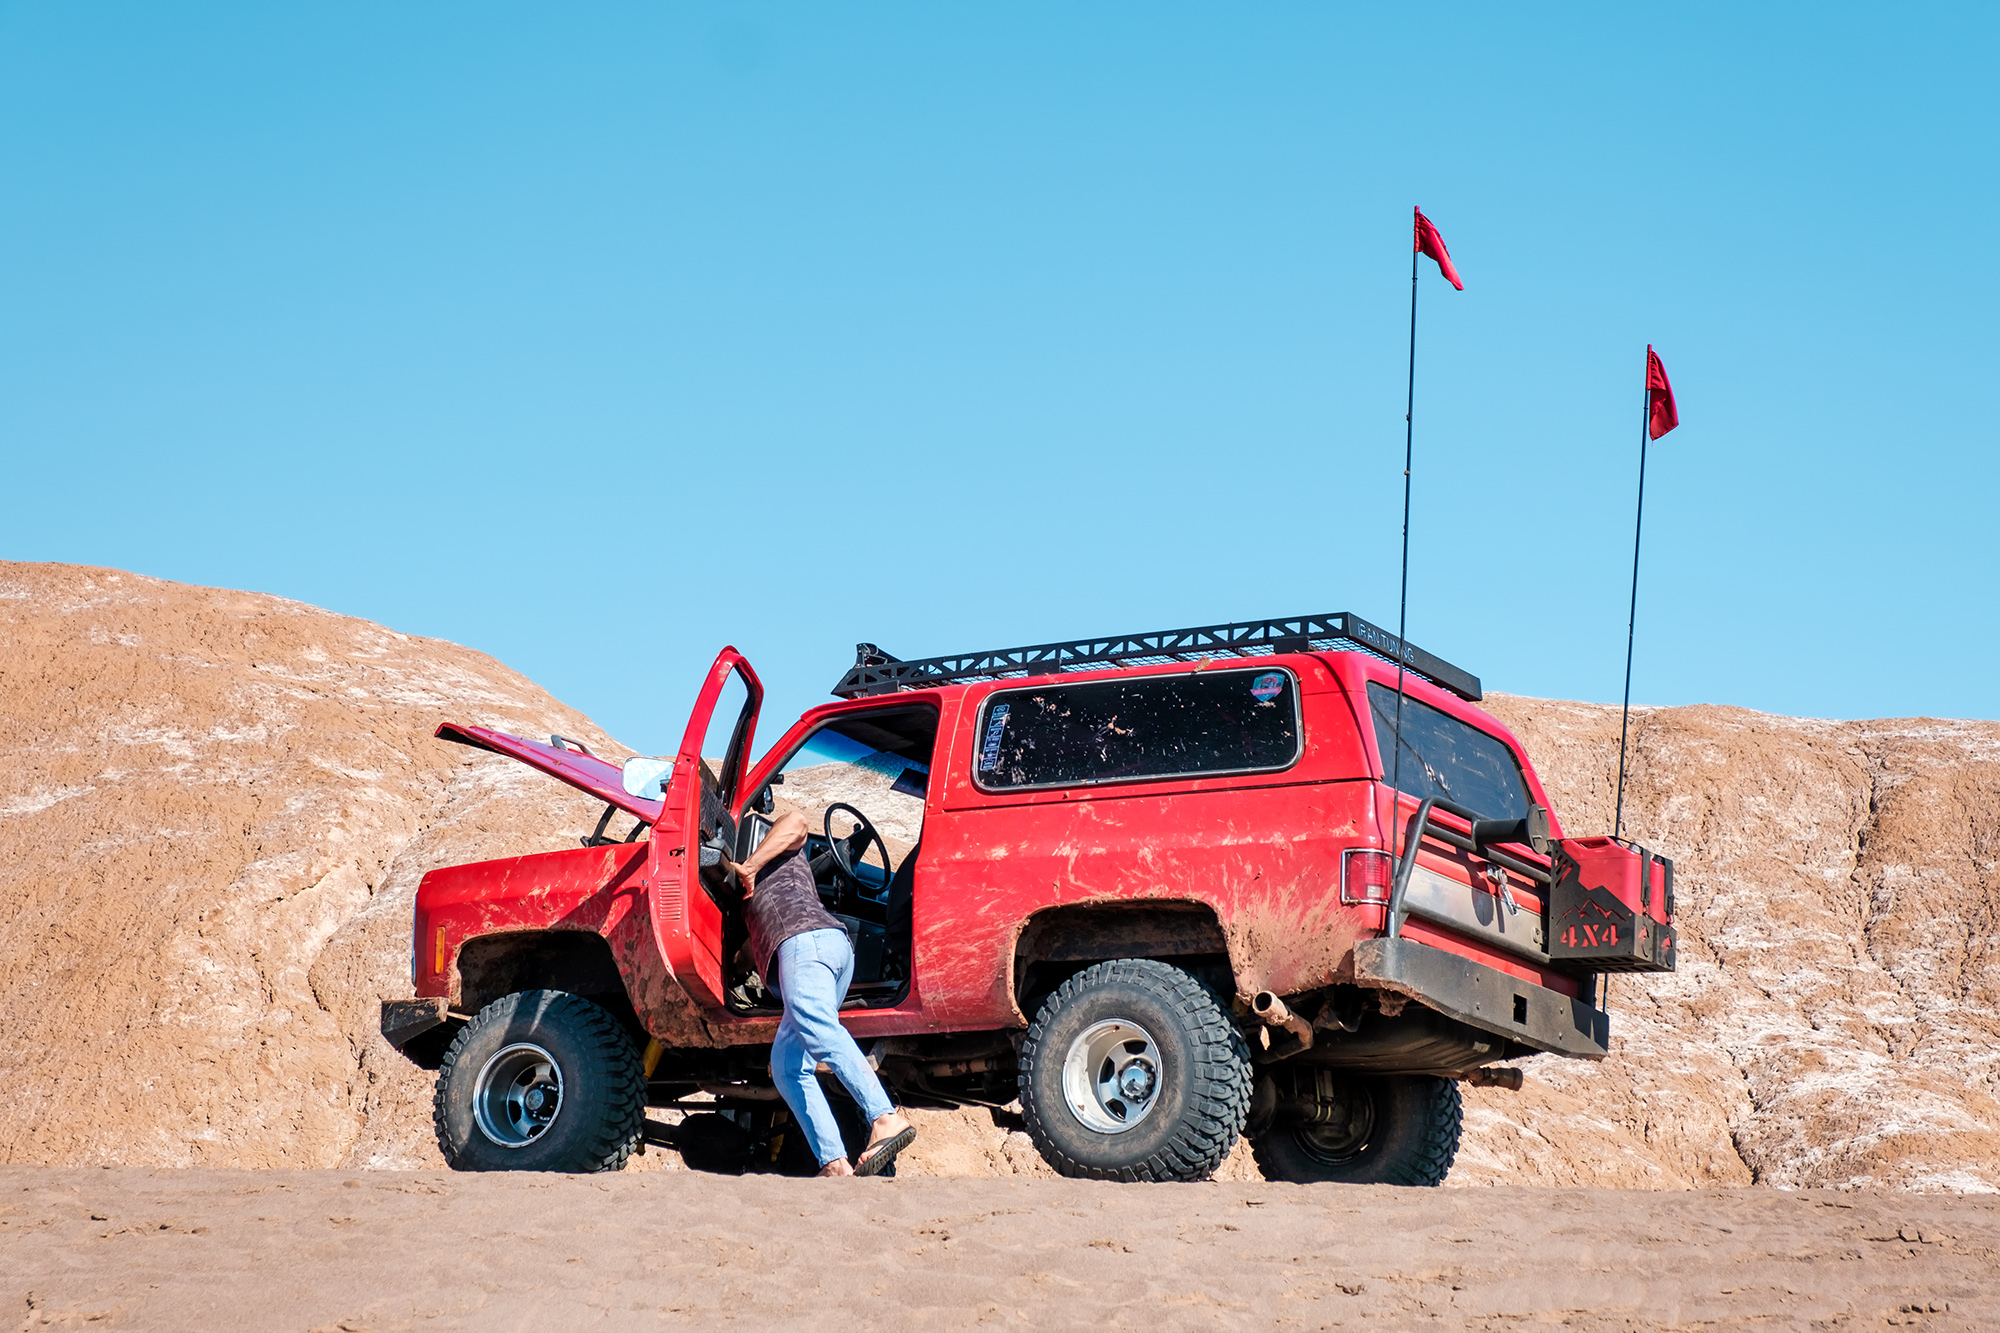 The-Kaluts-desert-in-a-4x4 